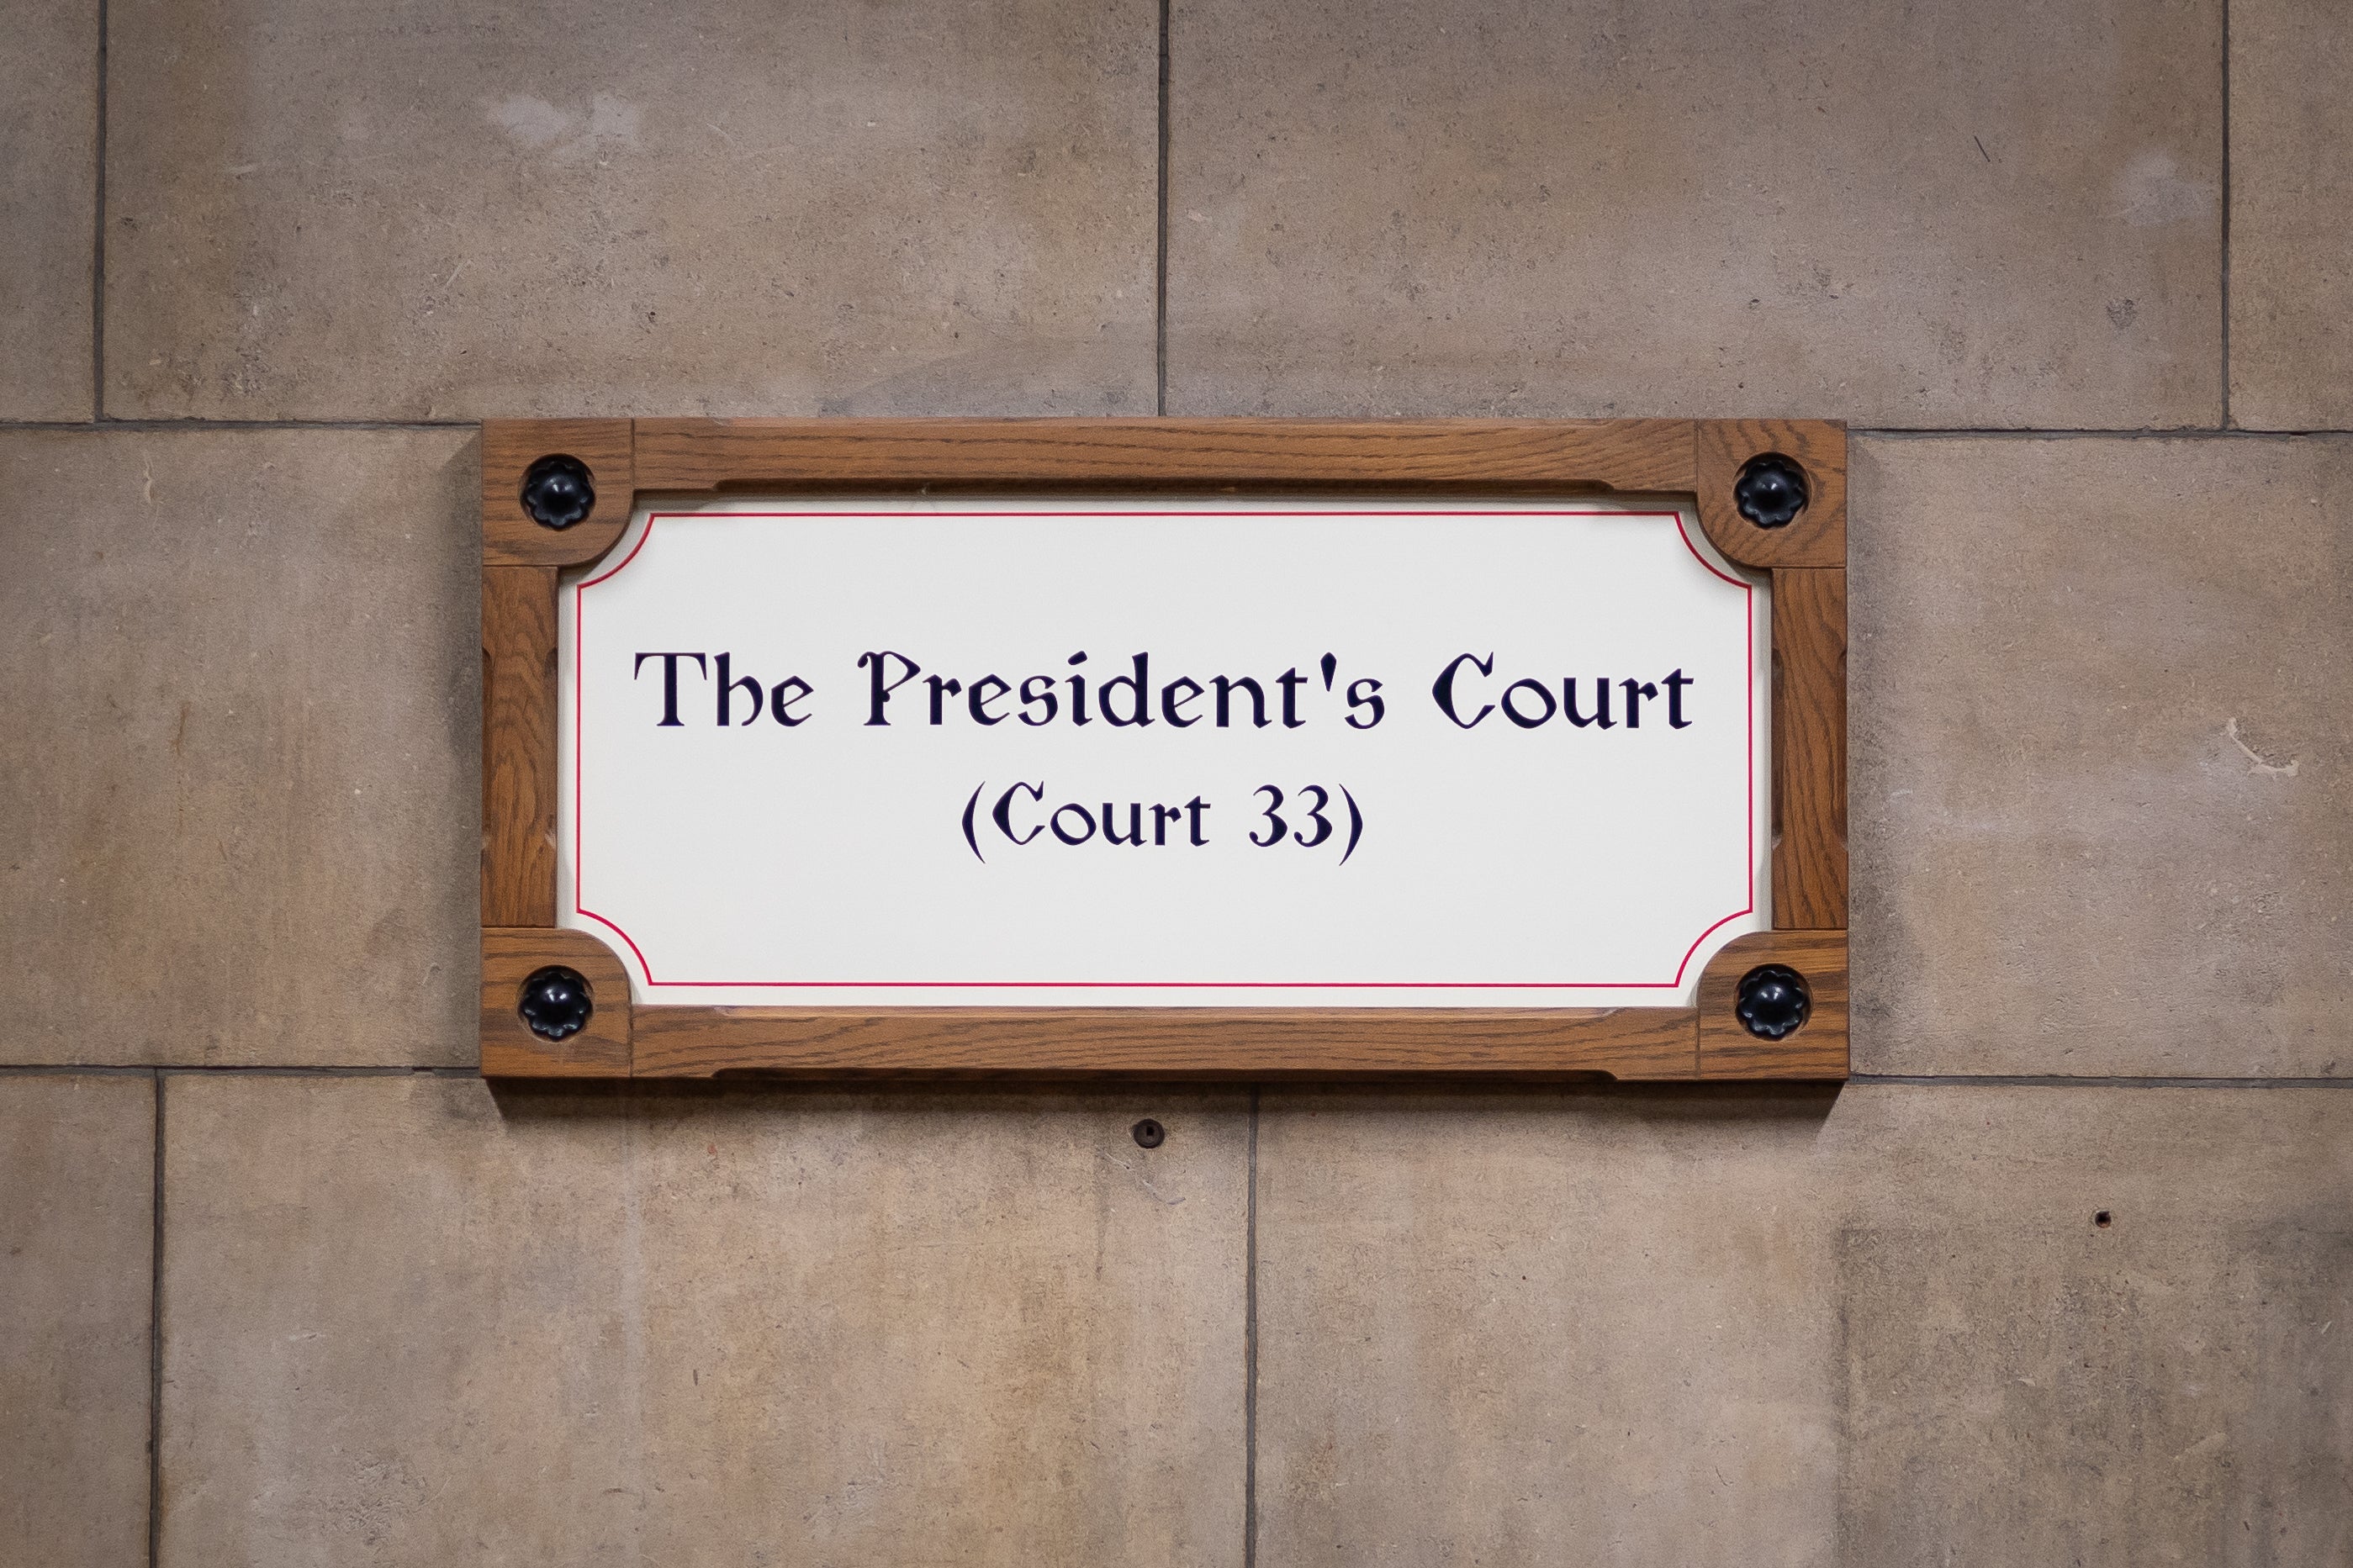 A sign outside The President’s Court (Court 33) at the Royal Courts of Justice in central London, where Sir Andrew McFarlane hears cases (Aaron Chown/PA)